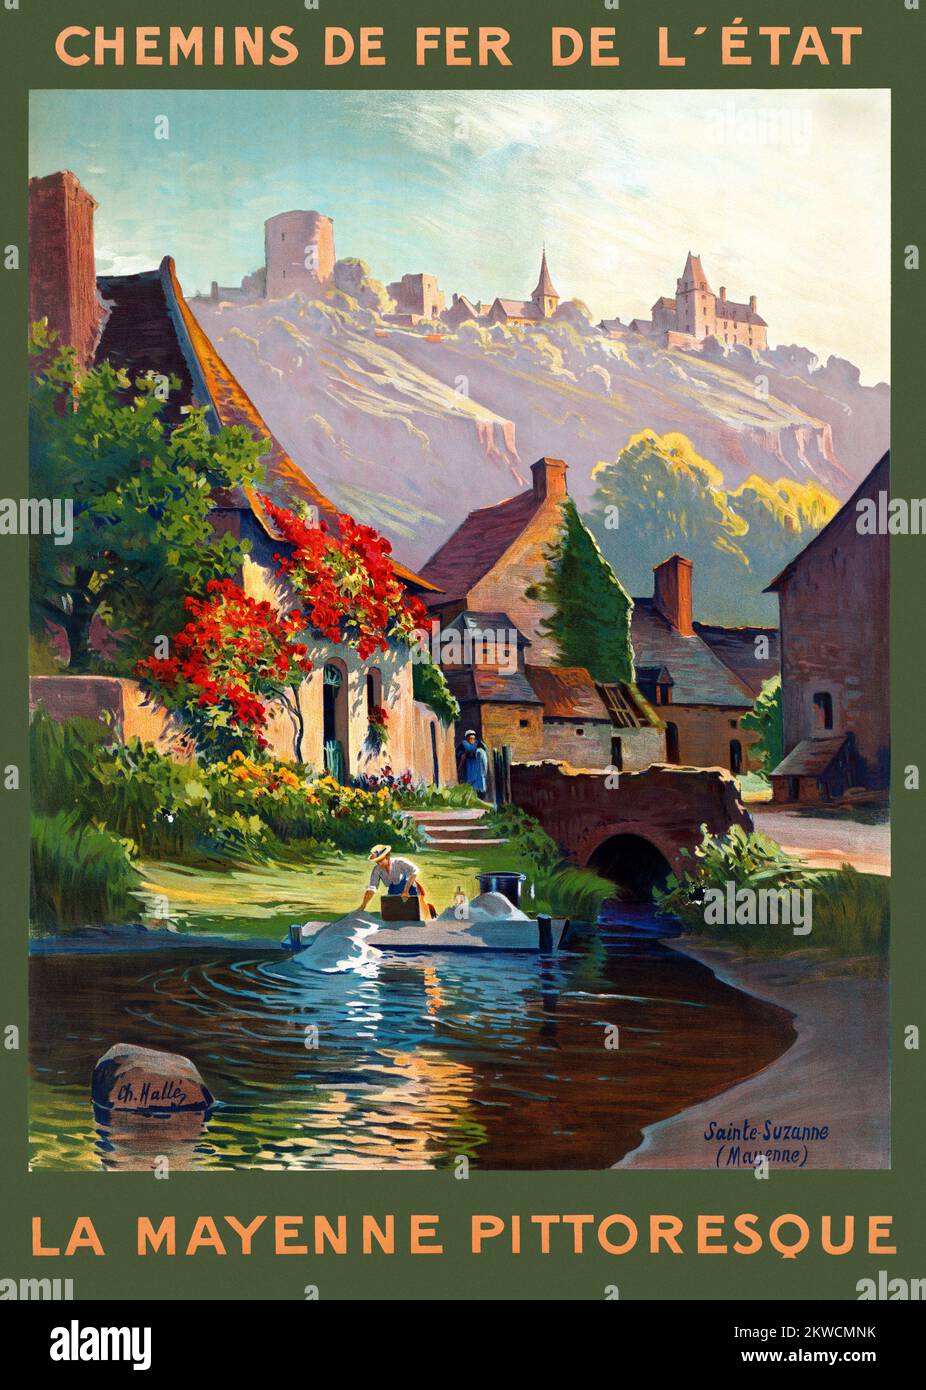 La Mayenne Pittoresque. Sainte Suzanne by Ch. Halle (dates unknown). Poster published in 1925 in France. Stock Photo